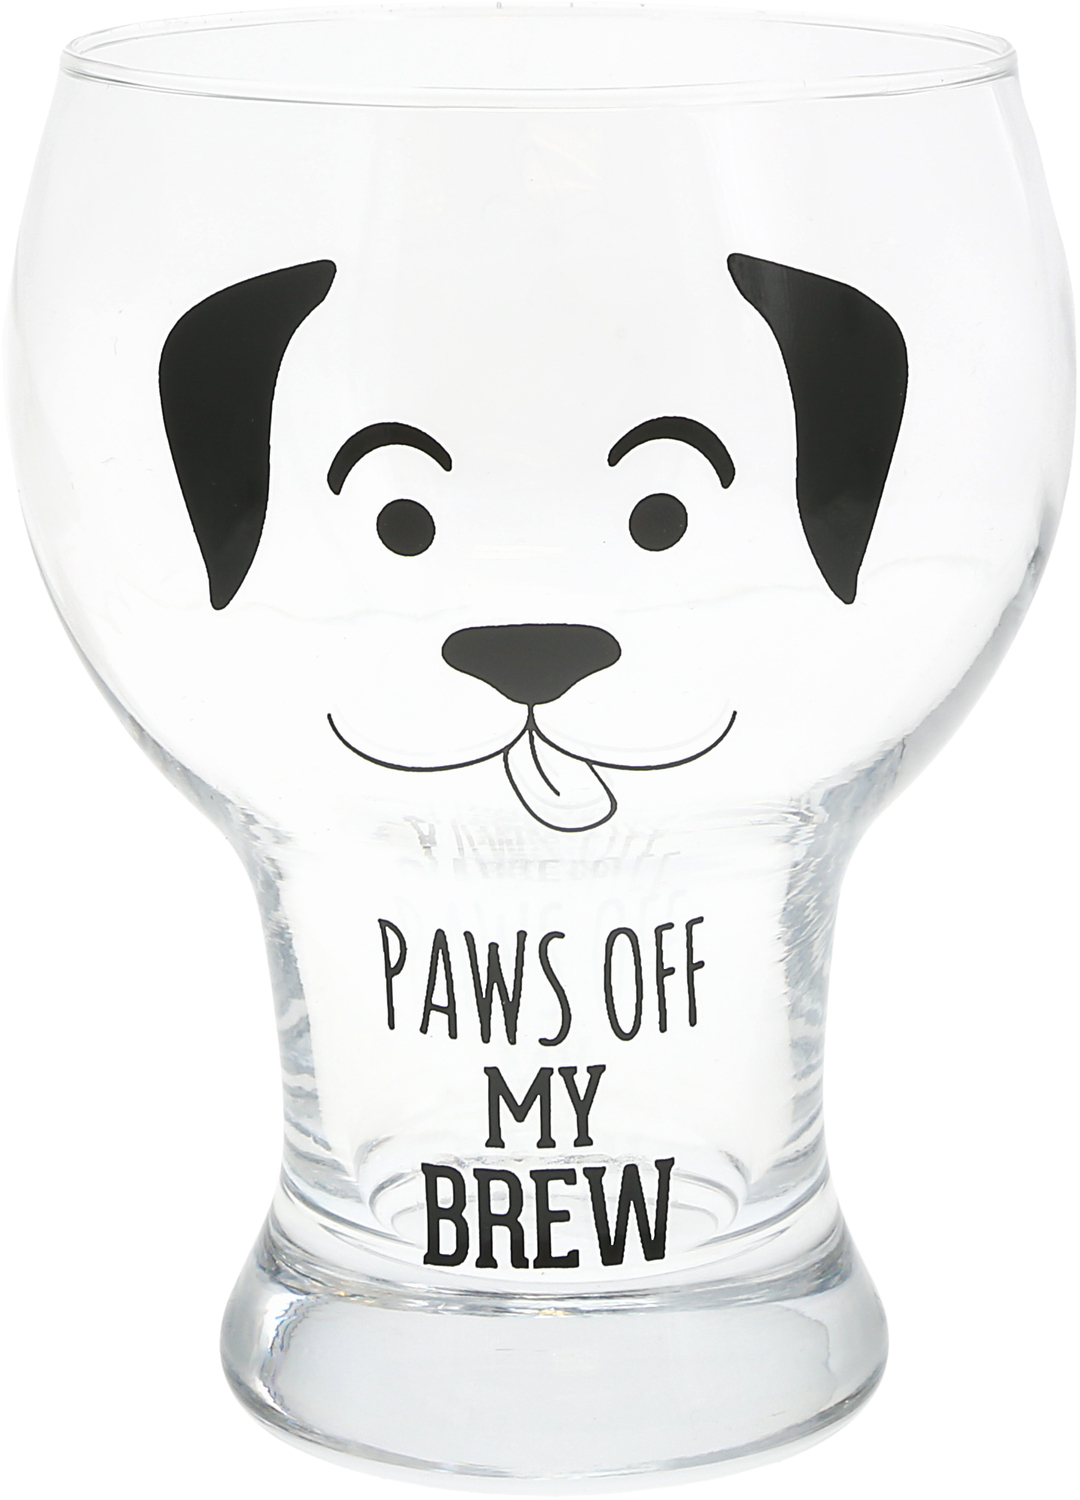 Paws Off - DOG by We Pets - Paws Off - DOG - 15 oz Pilsner Glass